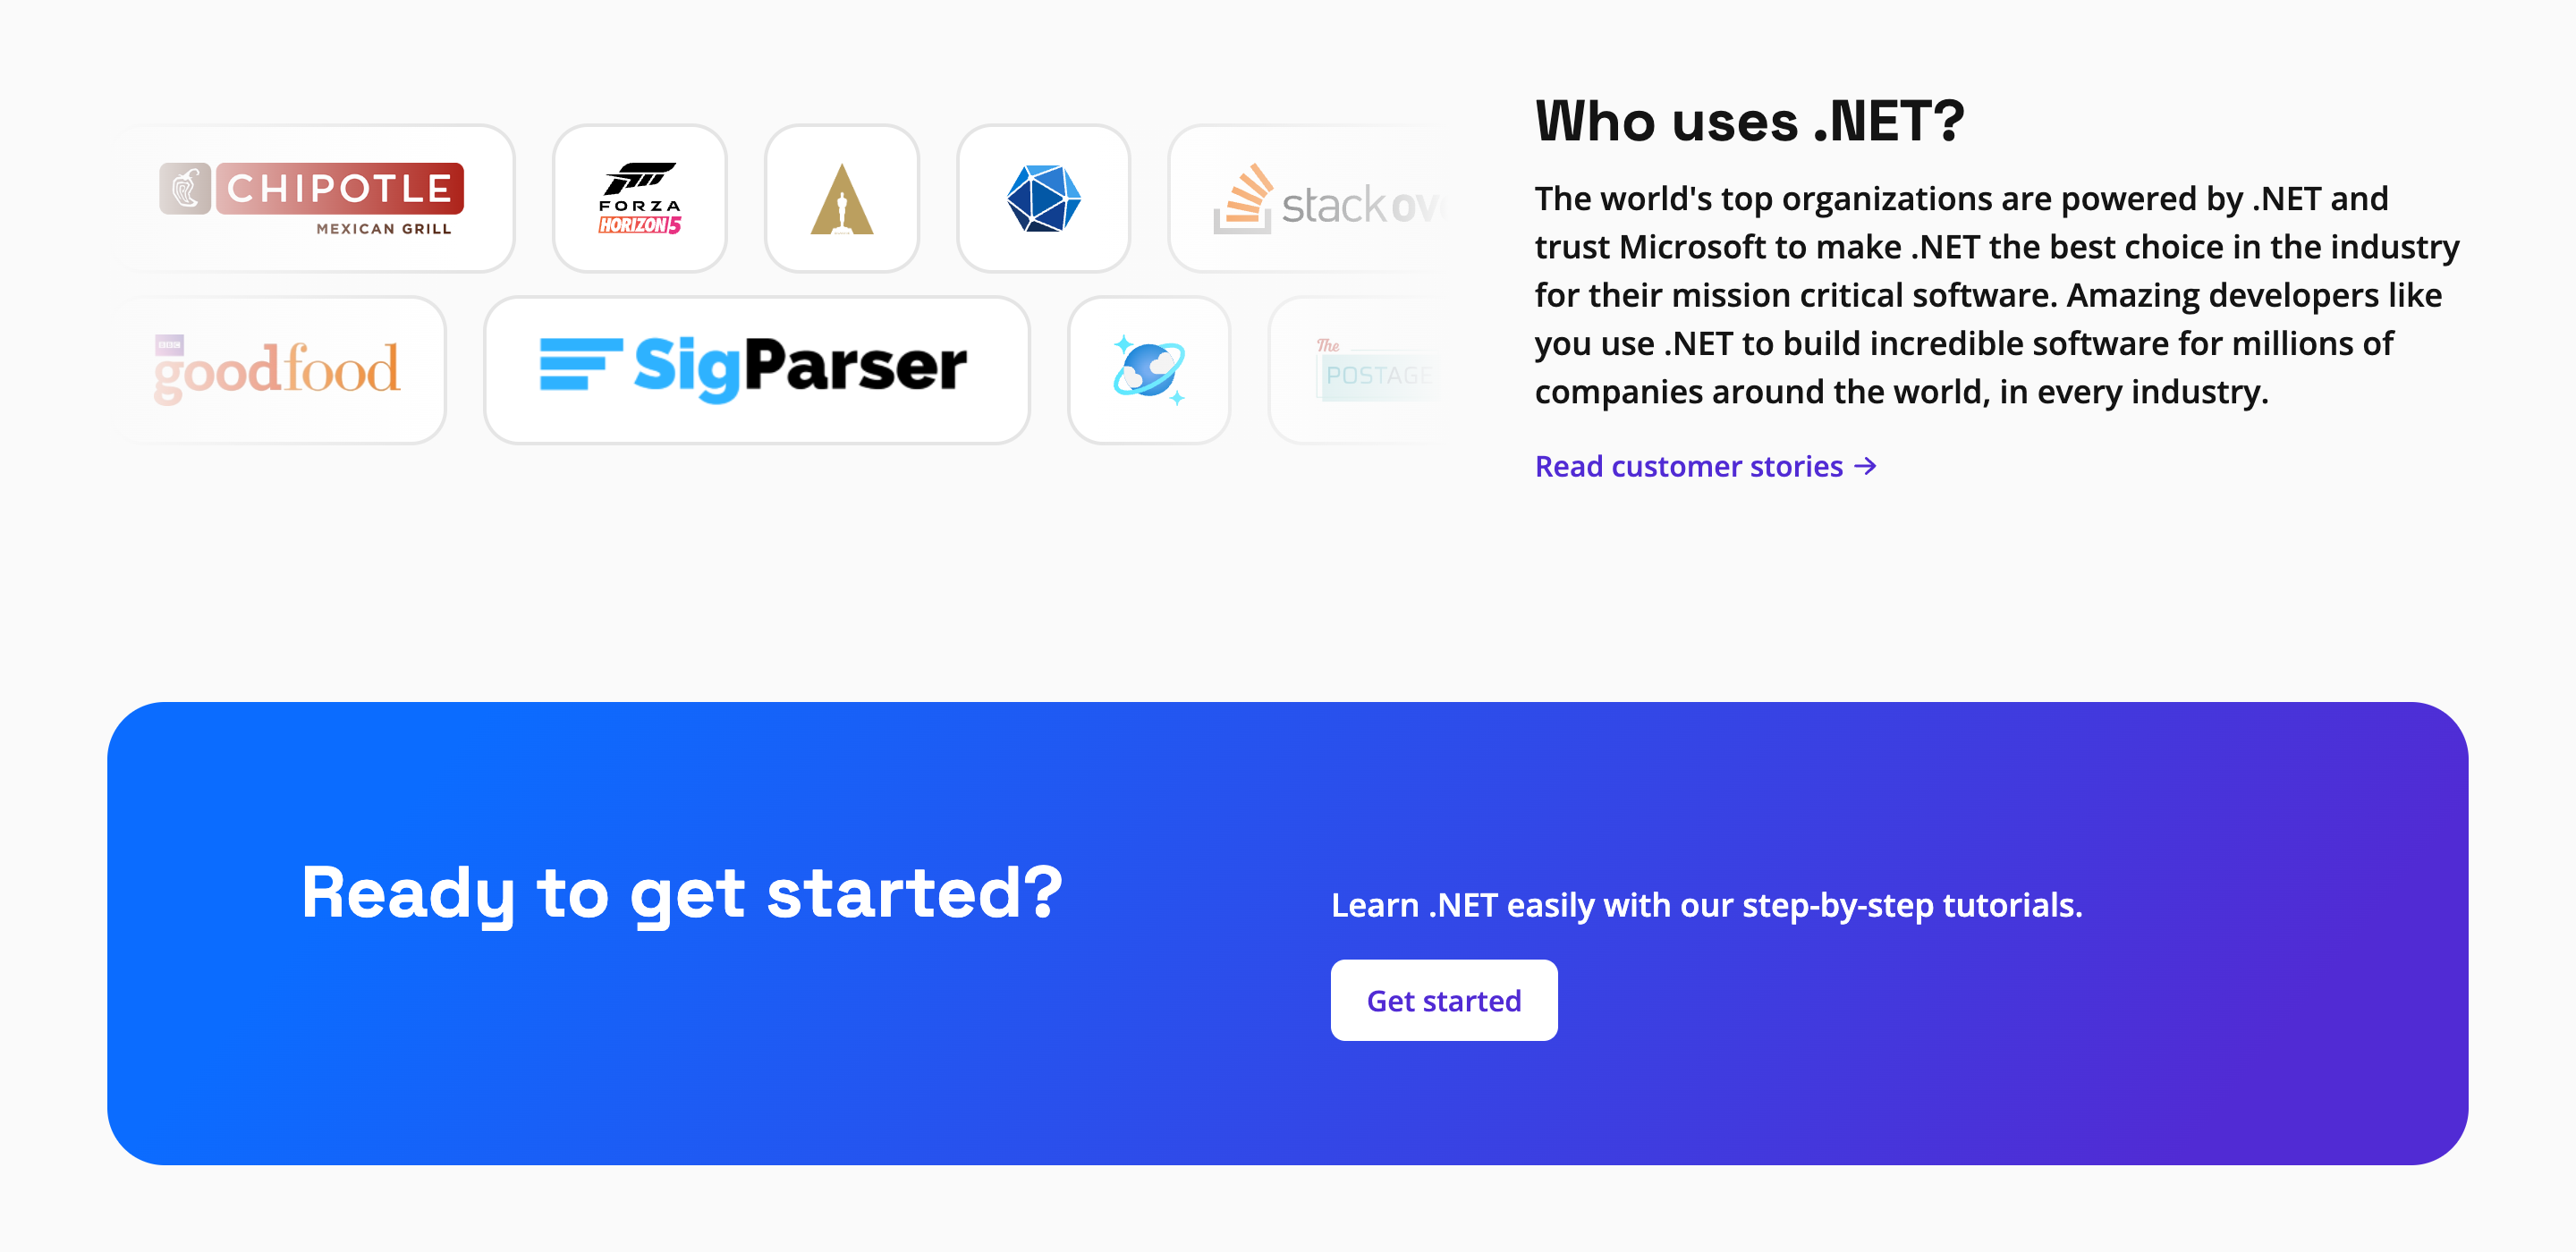 Screenshot of the footer section. The first part features some notable logos, such as the Chipotle logo, text to back up who uses .NET, and a link to read customer stories. Below is a full-width card with a blue-purple background gradient, a headline saying "Ready to get started?", some text about learning .NET, and a button saying "Get started."